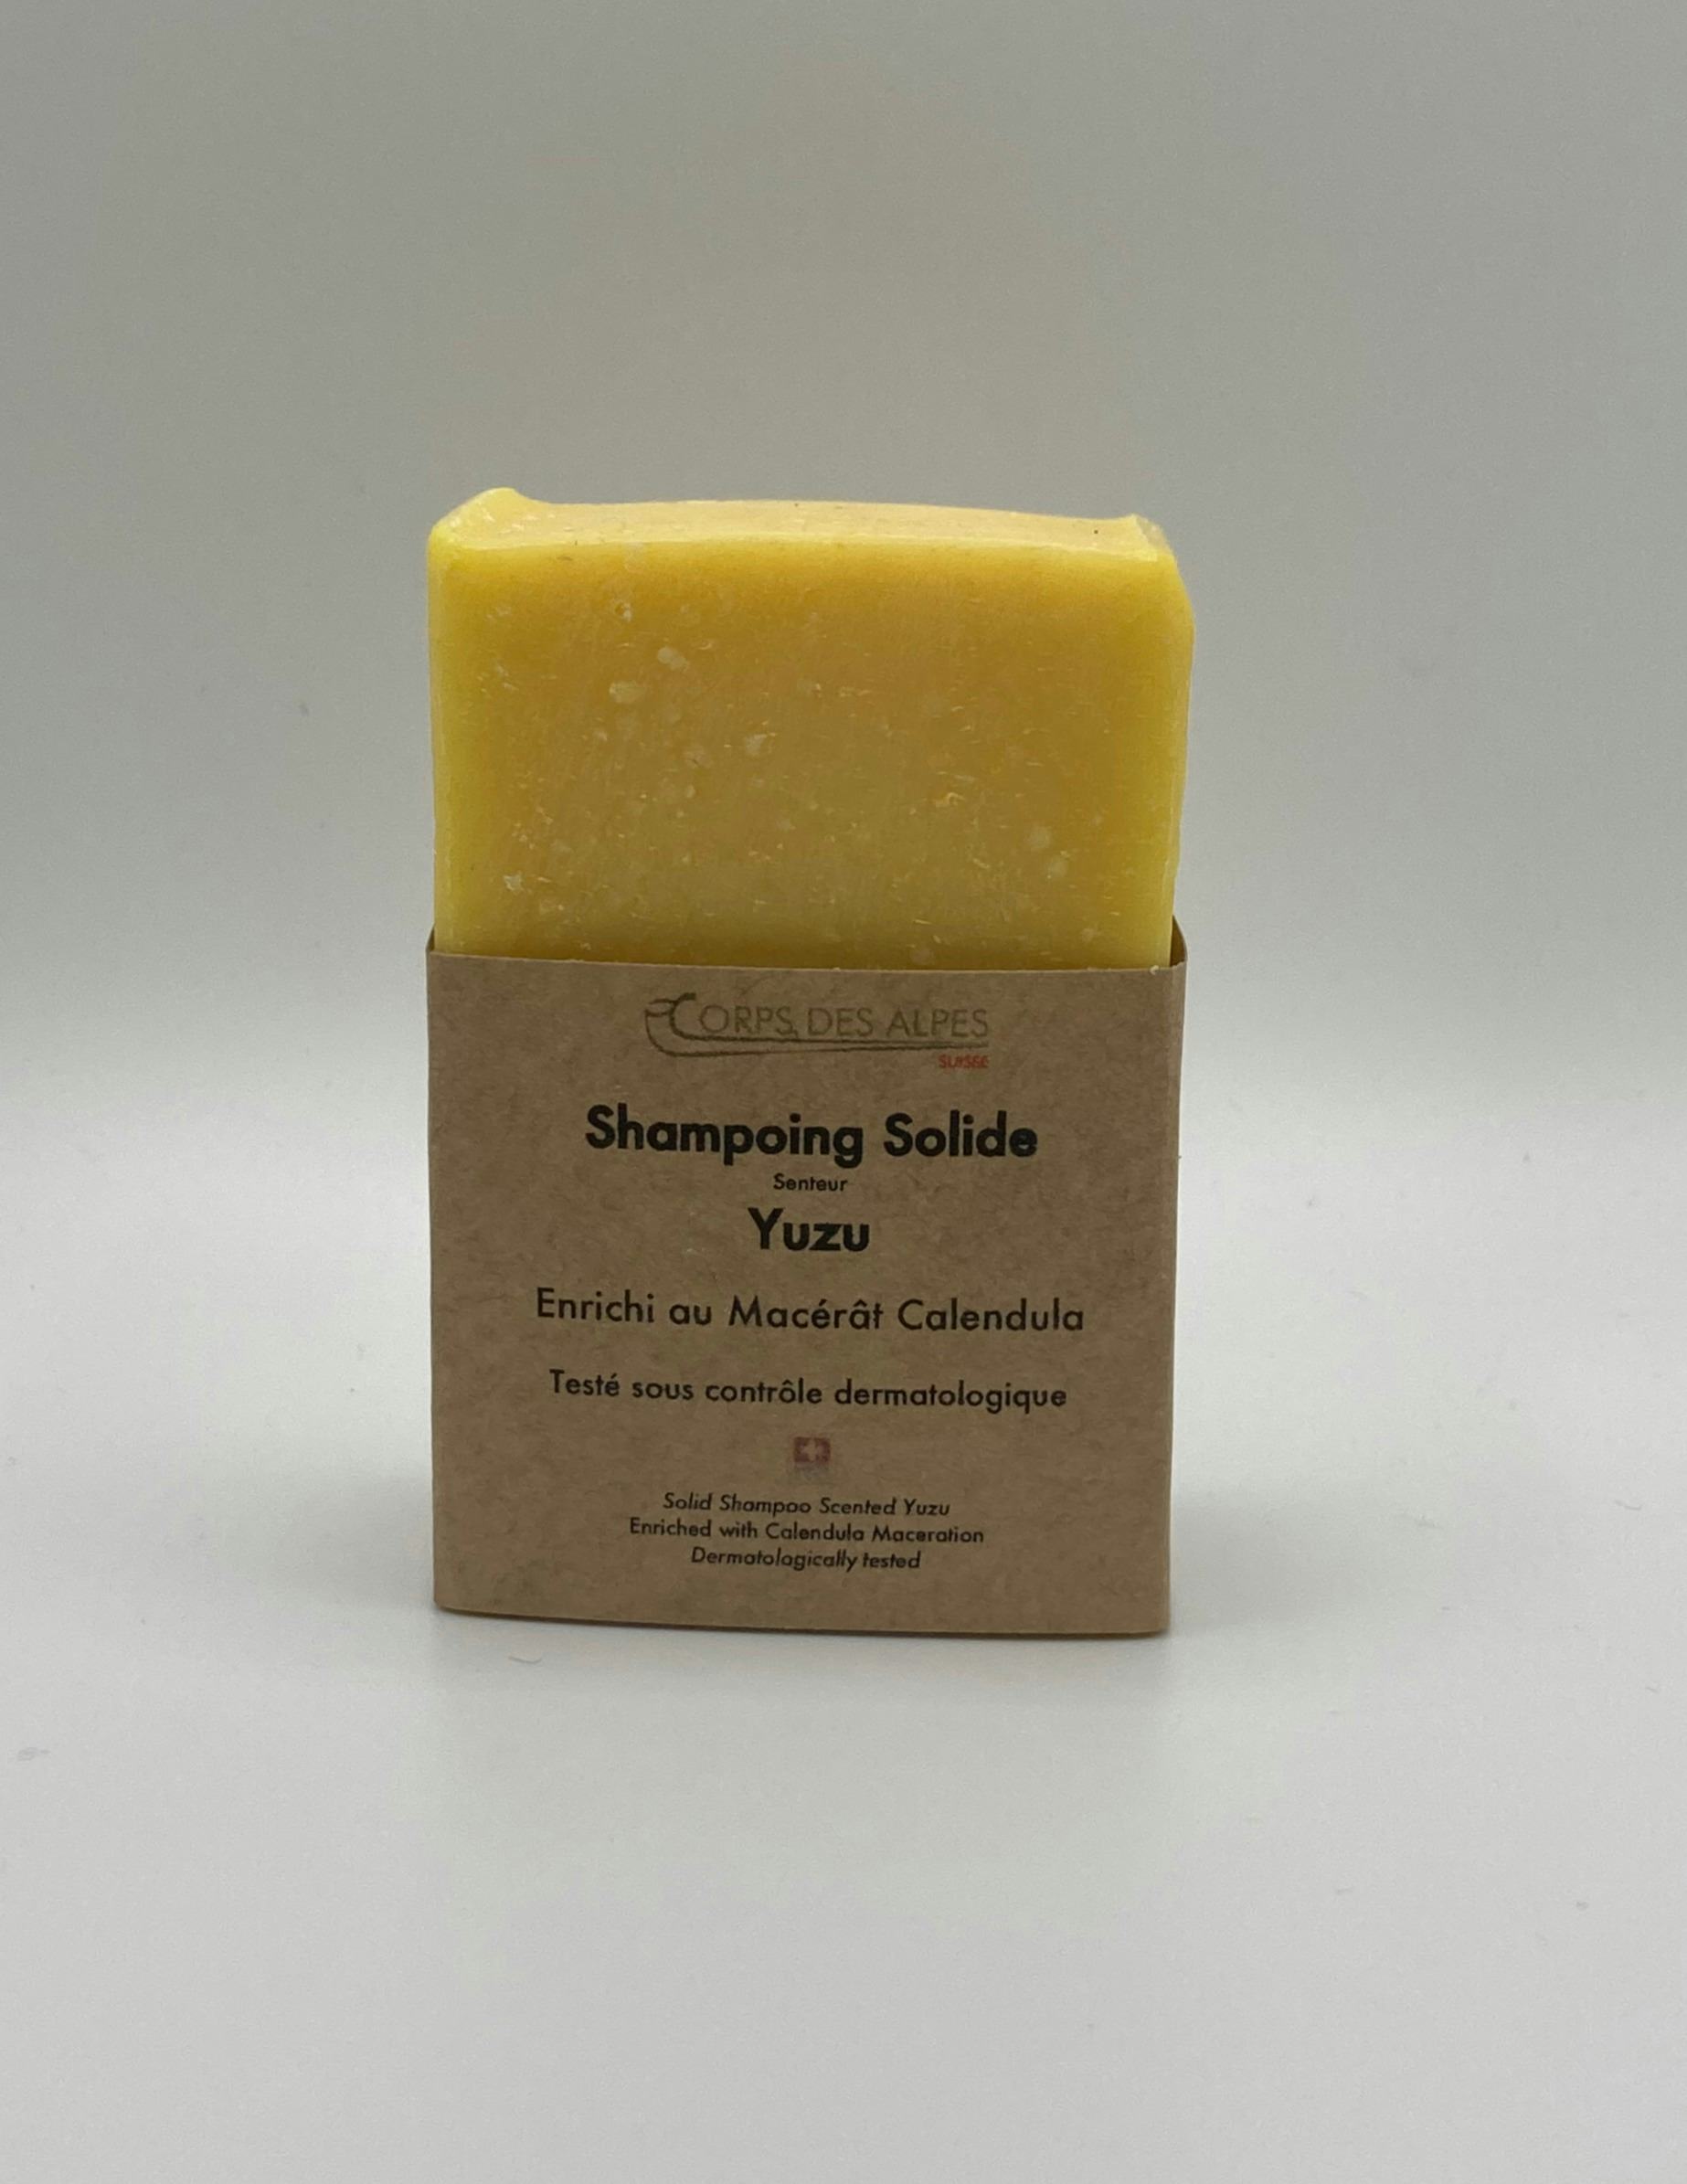 Shampoing solide senteur Yuzu, artisanal product for direct sale in Switzerland